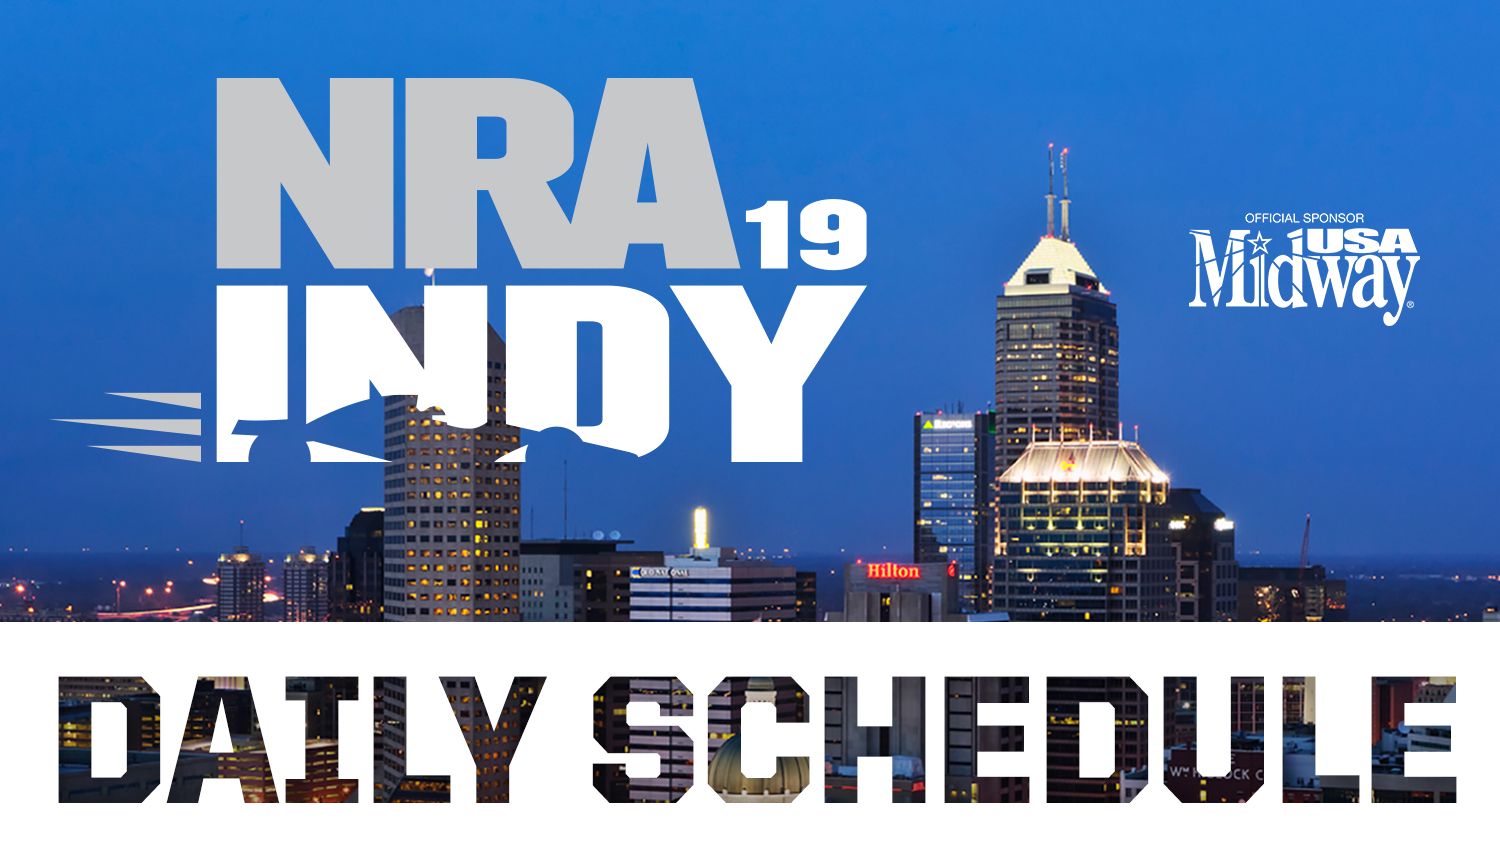 NRA Annual Meeting Events: Friday, April 26